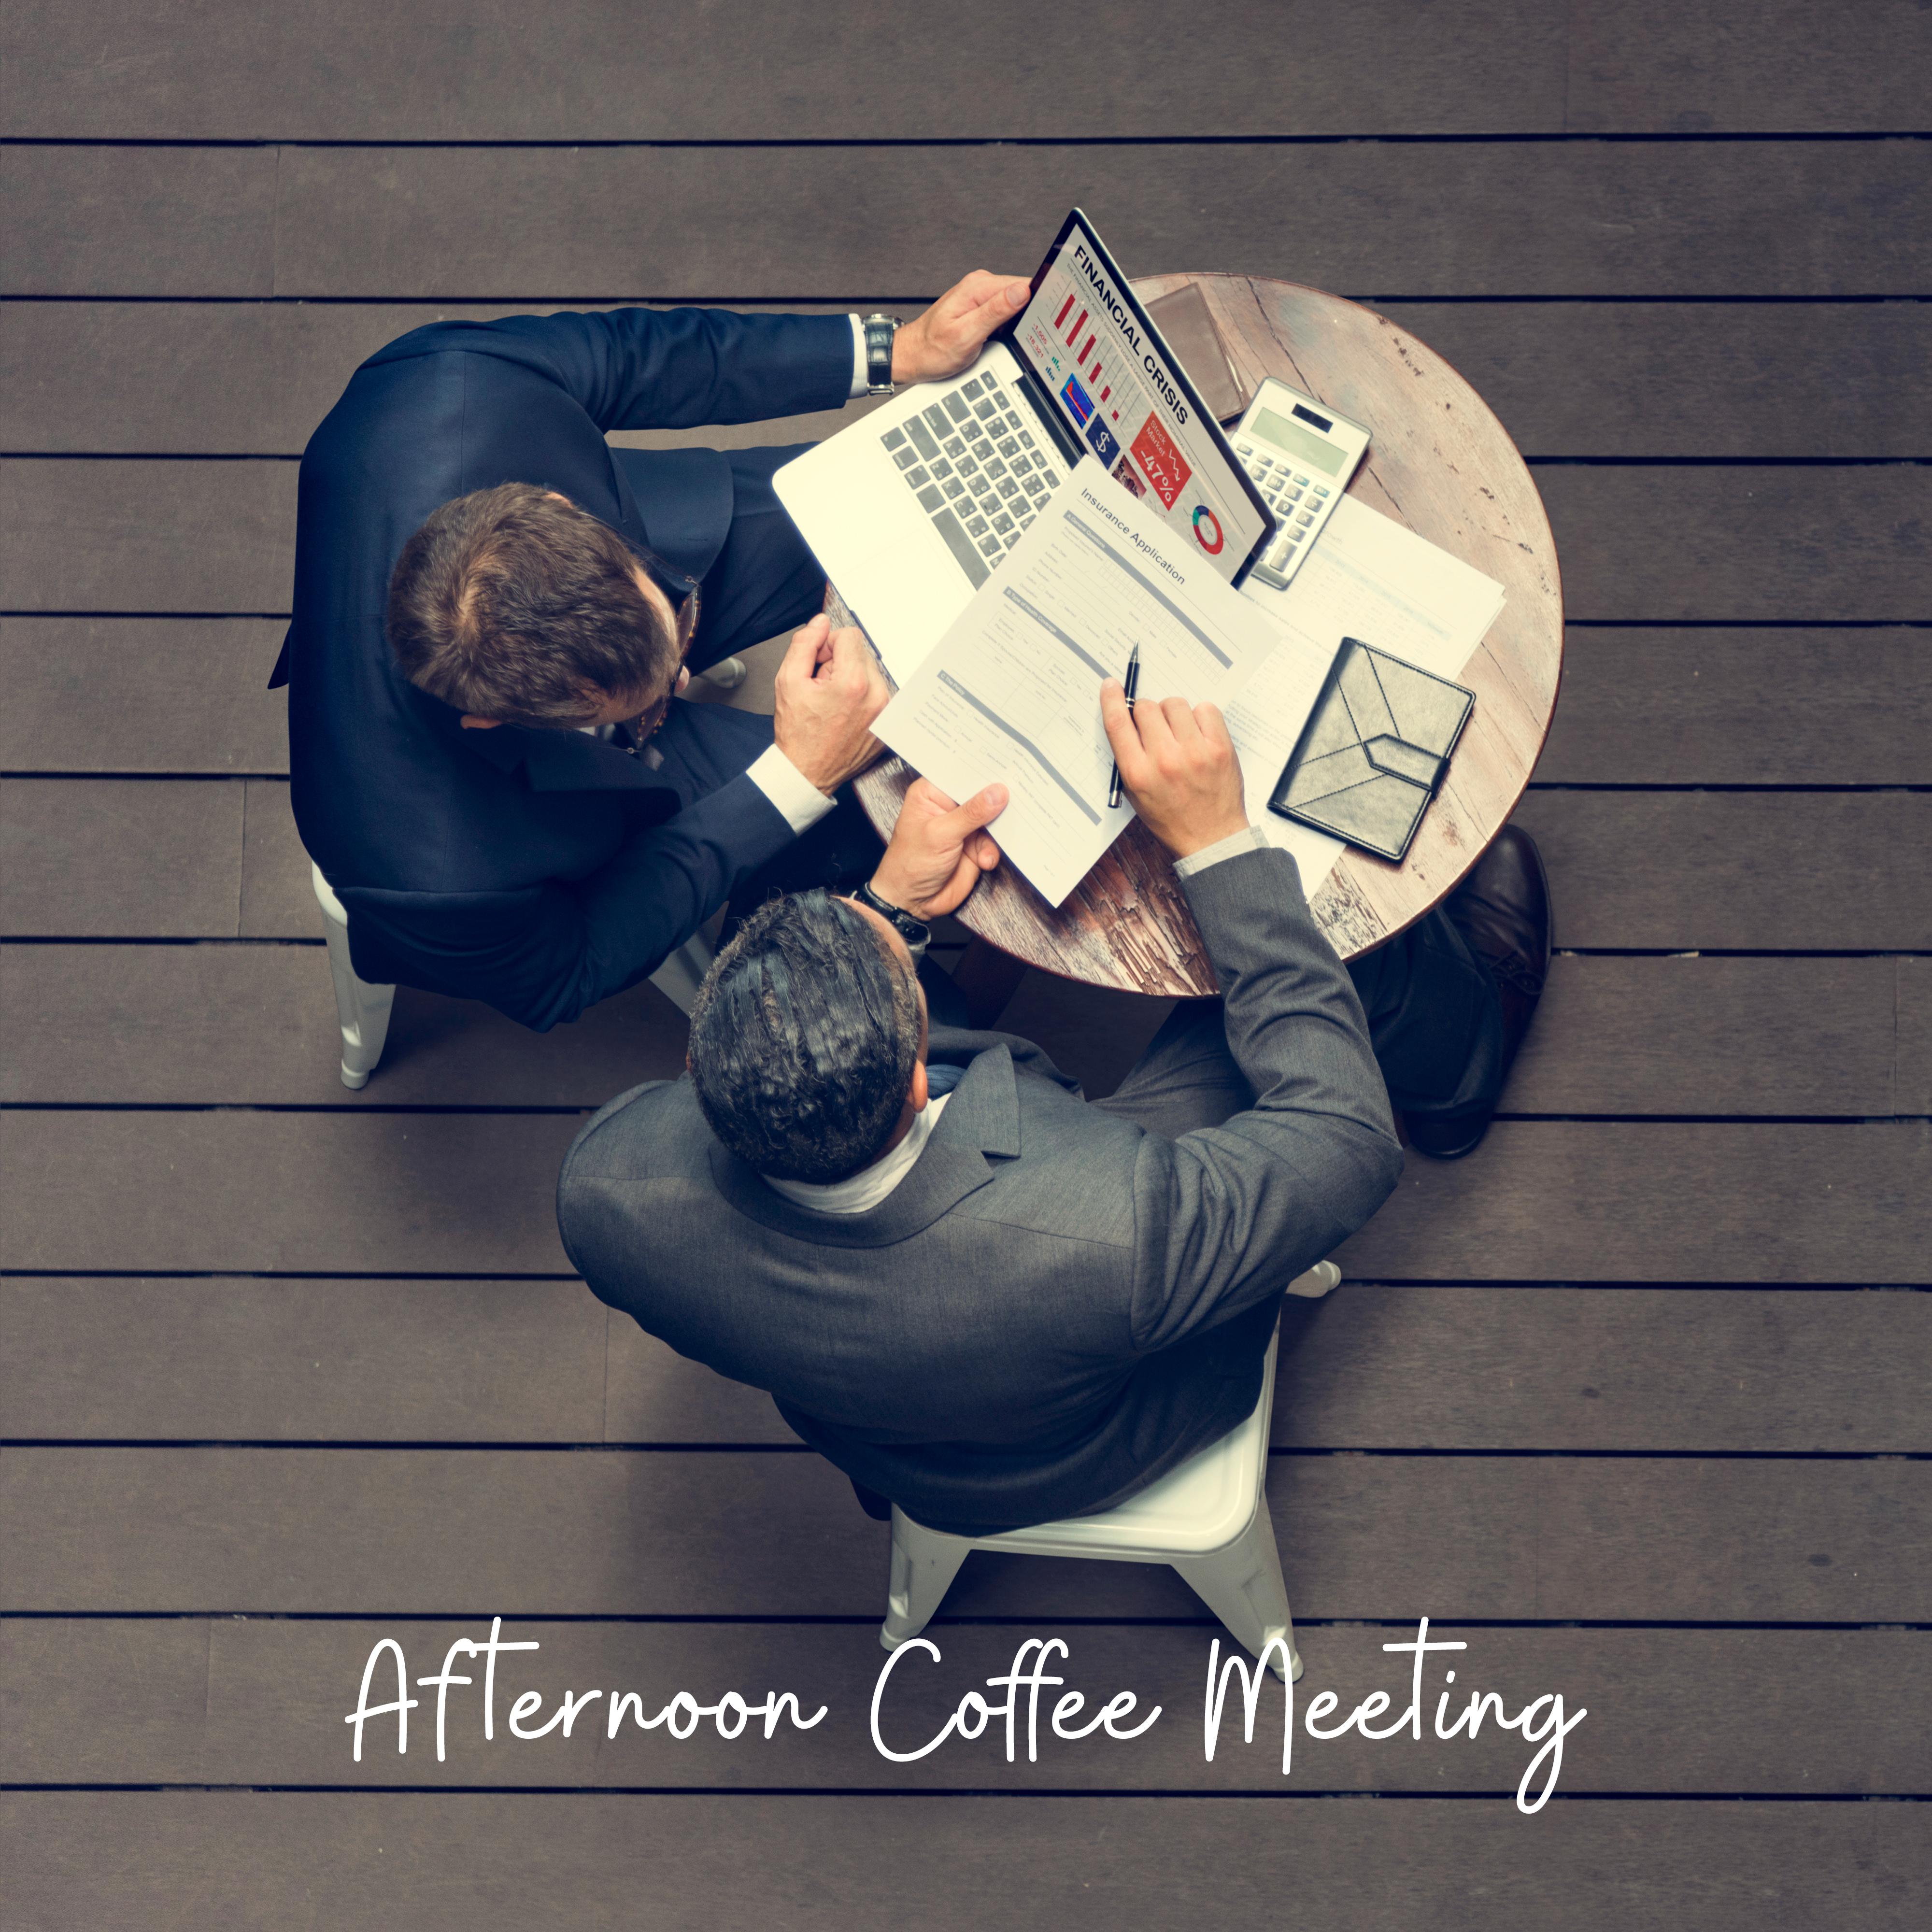 Afternoon Coffee Meeting: 2019 Smooth Jazz Soft Music Making the Meeting Even More Pleasant, Background for Cafe, Hotel Lounge or Restaurant, Vintage Instrumental Jazz Melodies